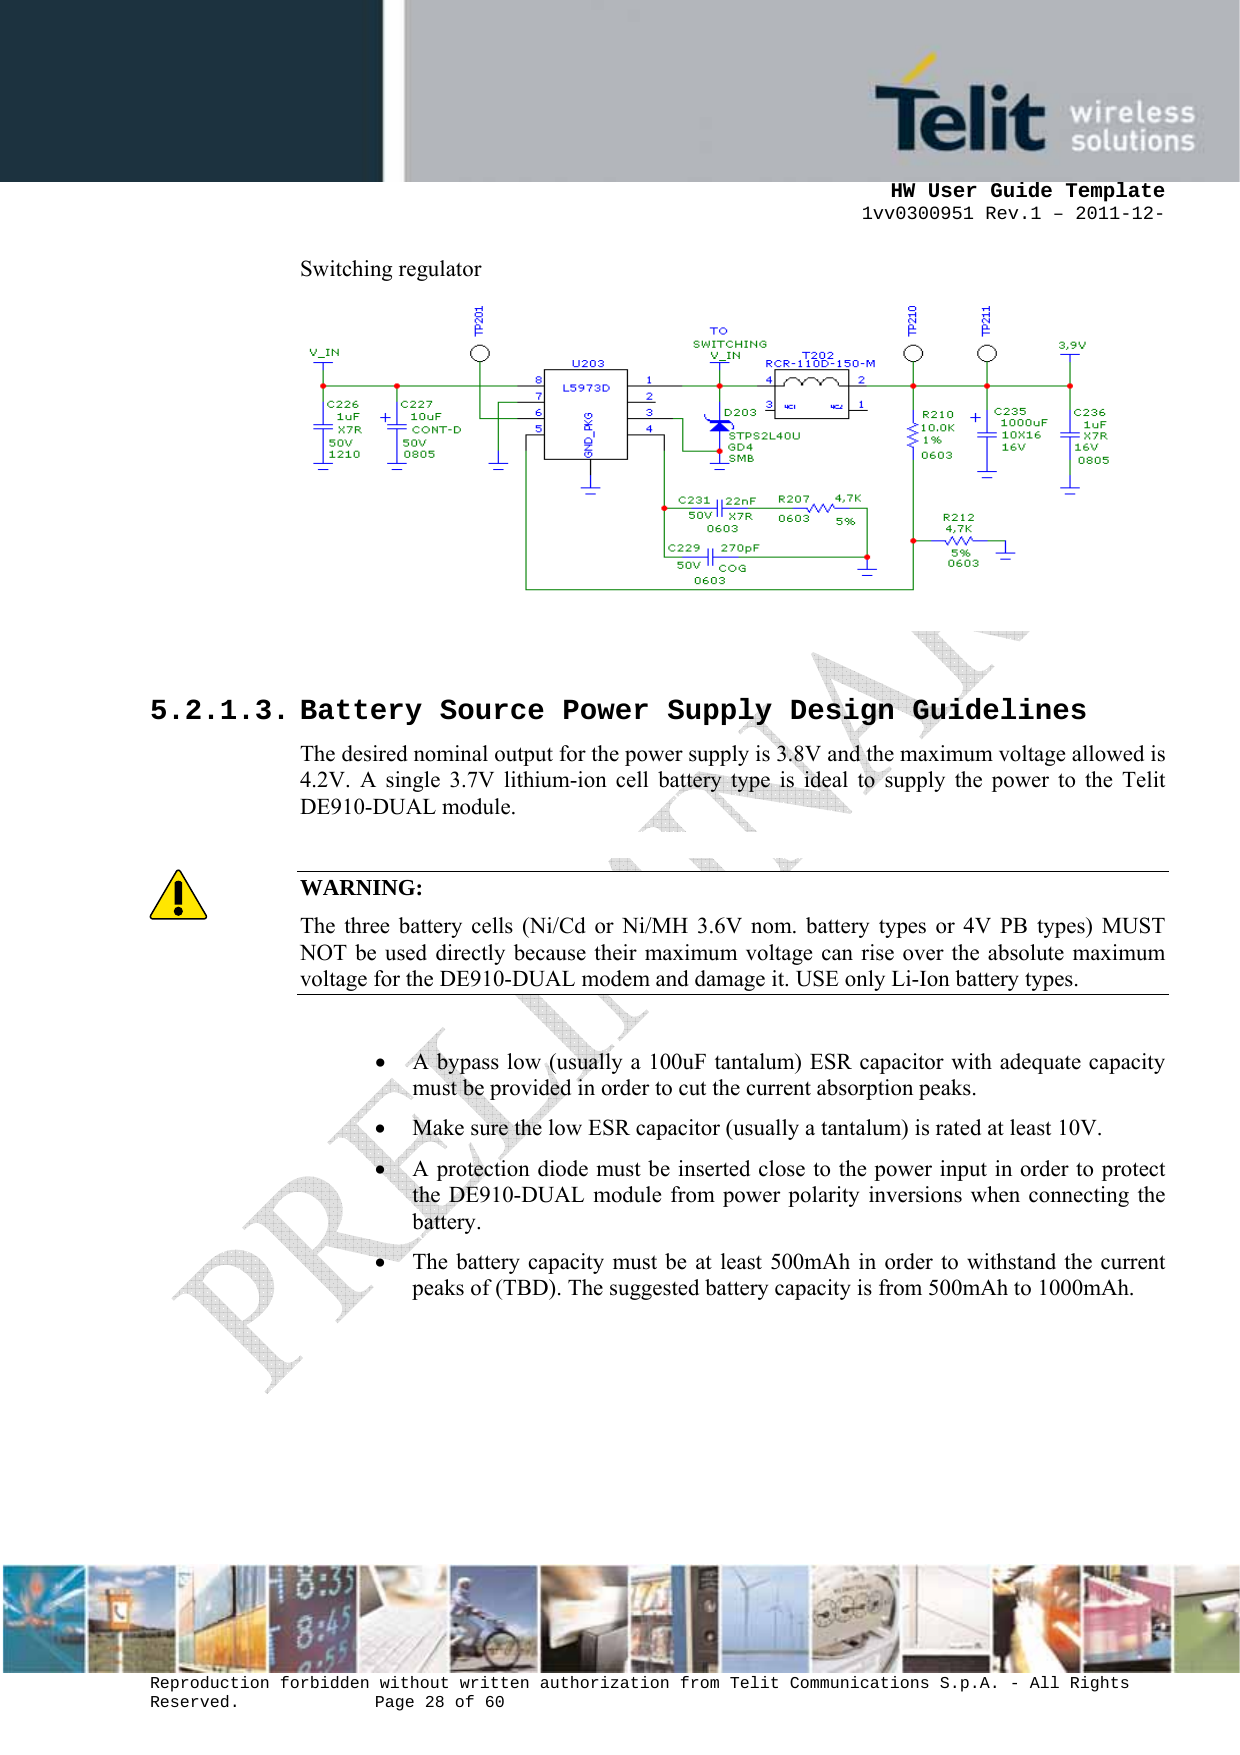      HW User Guide Template 1vv0300951 Rev.1 – 2011-12-  Reproduction forbidden without written authorization from Telit Communications S.p.A. - All Rights Reserved.    Page 28 of 60                                                     Switching regulator           5.2.1.3. Battery Source Power Supply Design Guidelines The desired nominal output for the power supply is 3.8V and the maximum voltage allowed is 4.2V. A single 3.7V lithium-ion cell battery type is ideal to supply the power to the Telit DE910-DUAL module.  WARNING: The three battery cells (Ni/Cd or Ni/MH 3.6V nom. battery types or 4V PB types) MUST NOT be used directly because their maximum voltage can rise over the absolute maximum voltage for the DE910-DUAL modem and damage it. USE only Li-Ion battery types.  • A bypass low (usually a 100uF tantalum) ESR capacitor with adequate capacity must be provided in order to cut the current absorption peaks.  • Make sure the low ESR capacitor (usually a tantalum) is rated at least 10V.  • A protection diode must be inserted close to the power input in order to protect the DE910-DUAL module from power polarity inversions when connecting the battery. • The battery capacity must be at least 500mAh in order to withstand the current peaks of (TBD). The suggested battery capacity is from 500mAh to 1000mAh.     